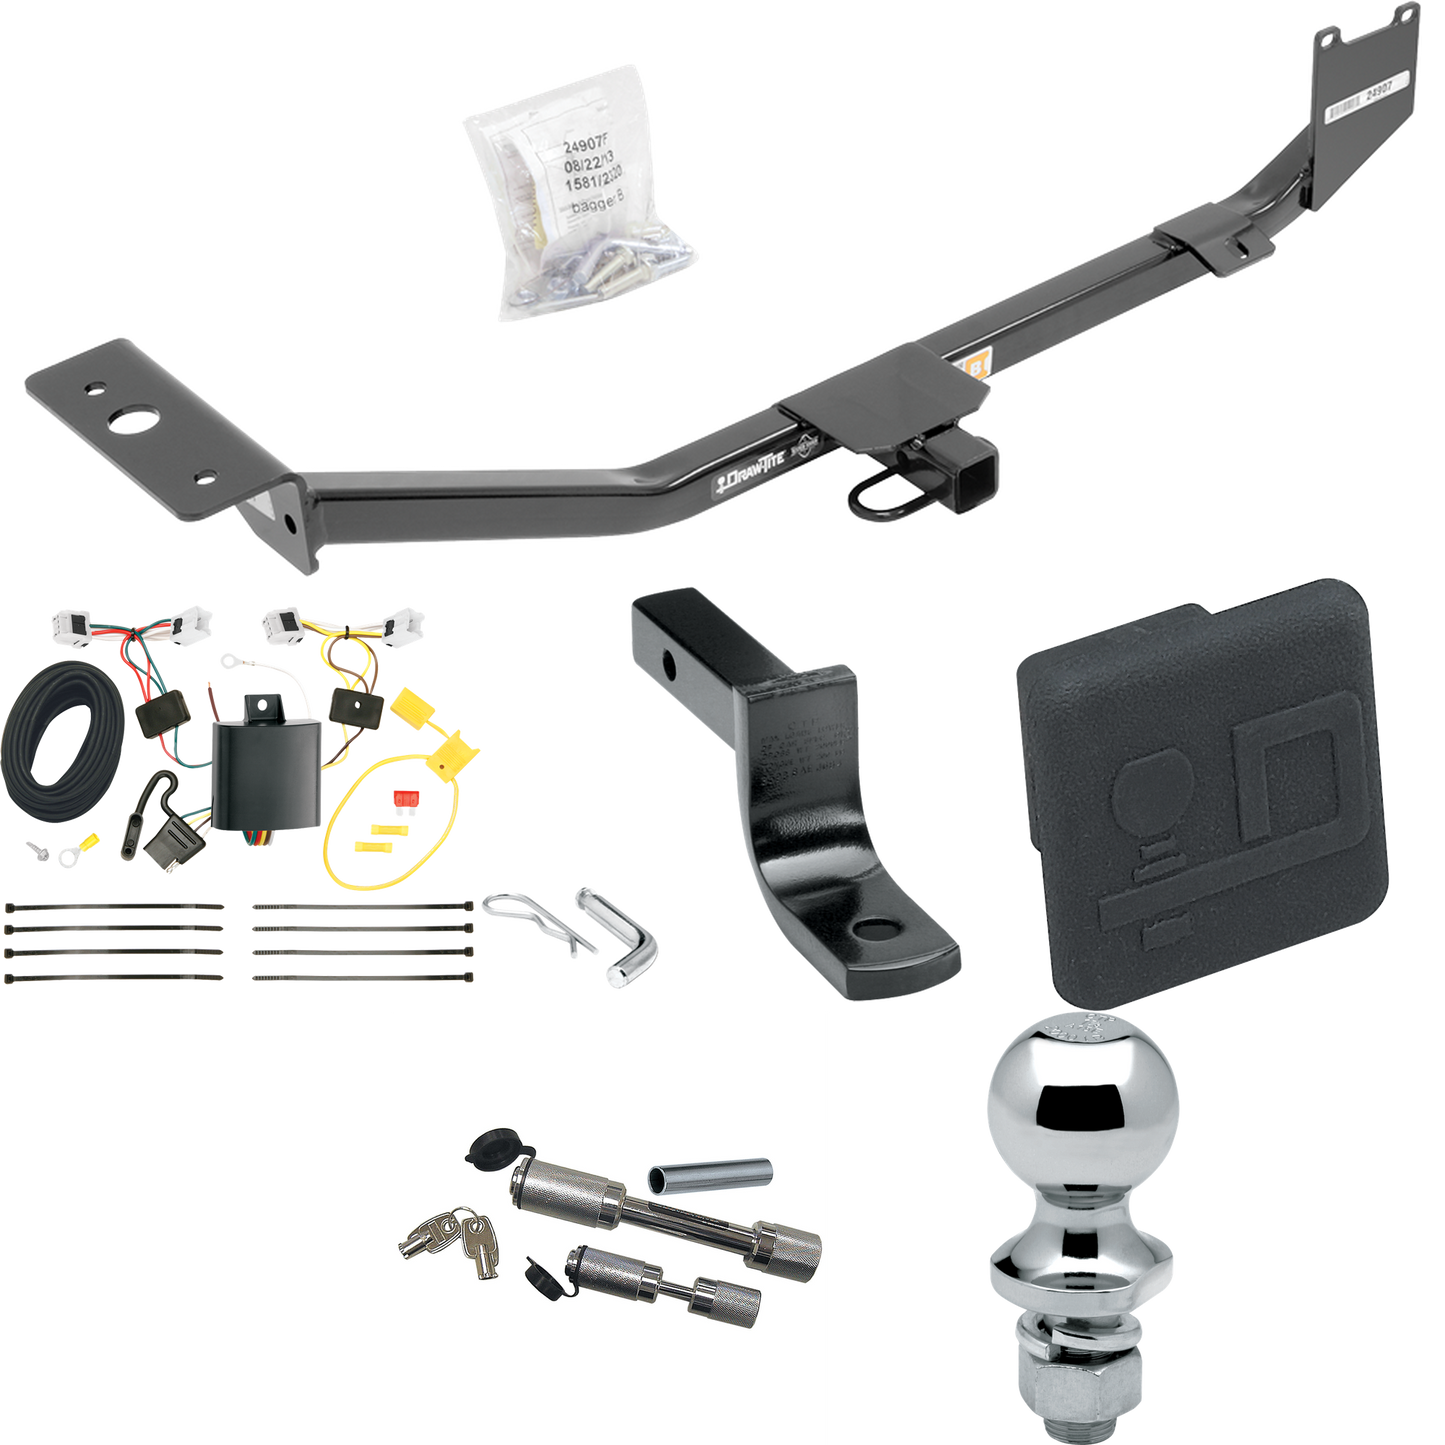 Fits 2013-2022 Nissan Sentra Trailer Hitch Tow PKG w/ 4-Flat Wiring Harness + Draw-Bar + 1-7/8" Ball + Hitch Cover + Dual Hitch & Coupler Locks (Excludes: SR & SV Models) By Draw-Tite